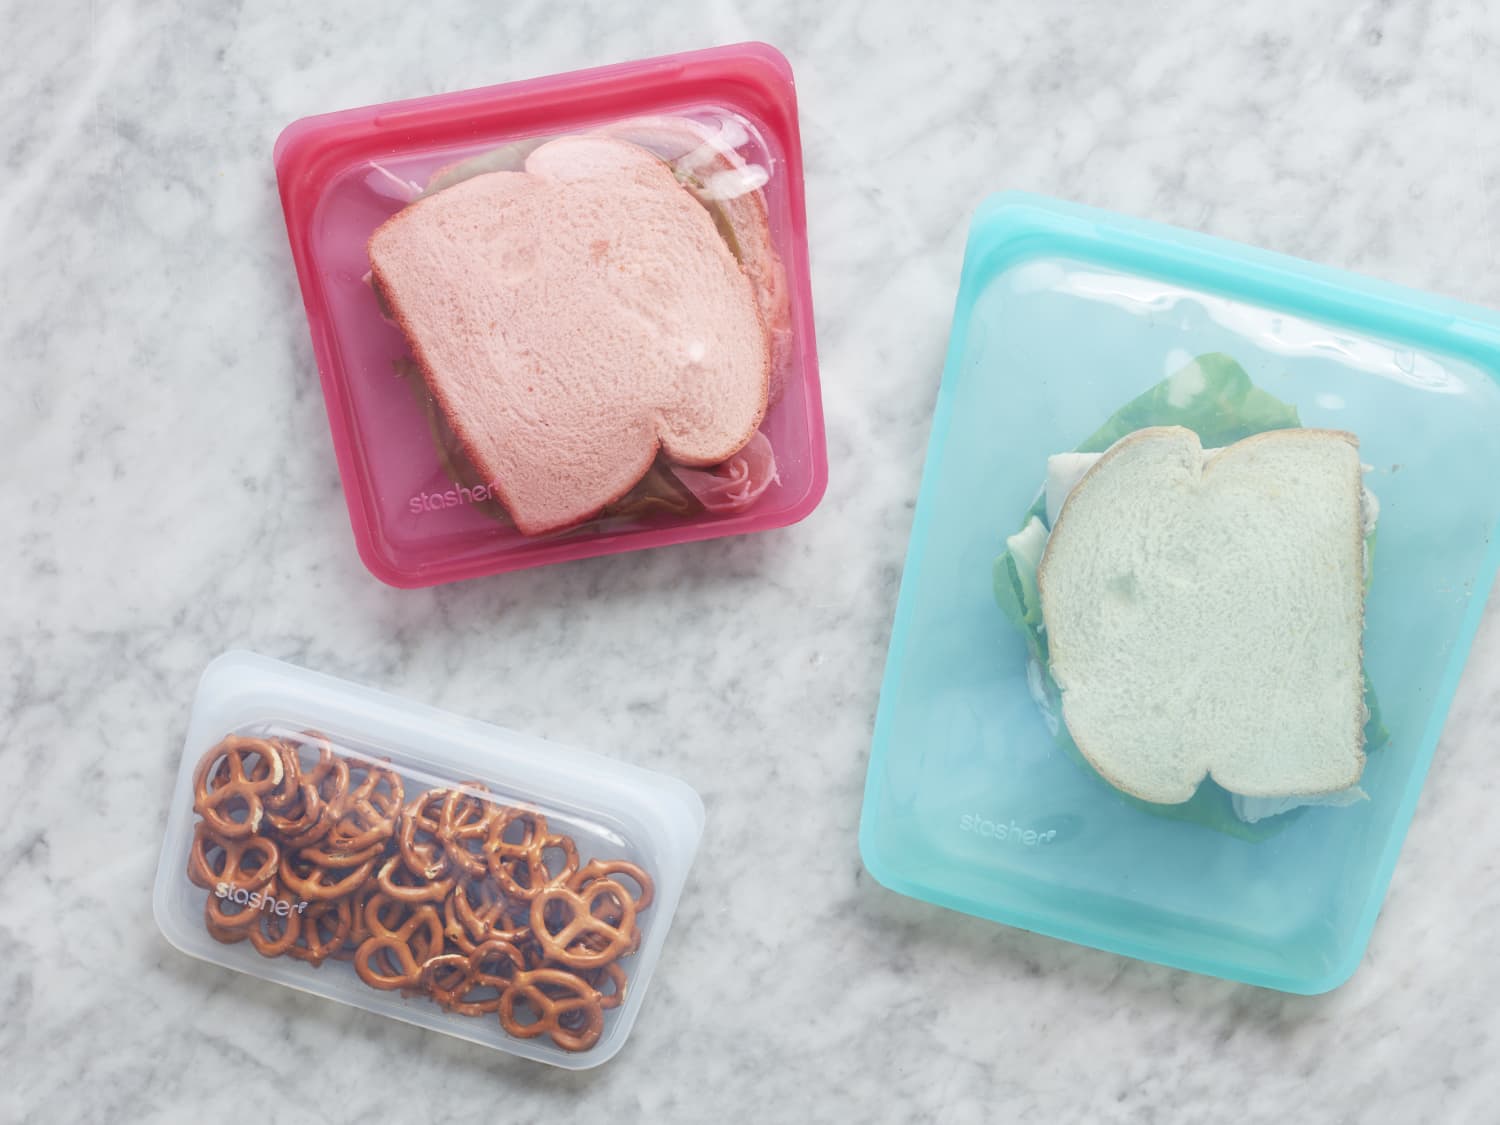 Cut Down on Plastic With These Reusable Food Storage Bags